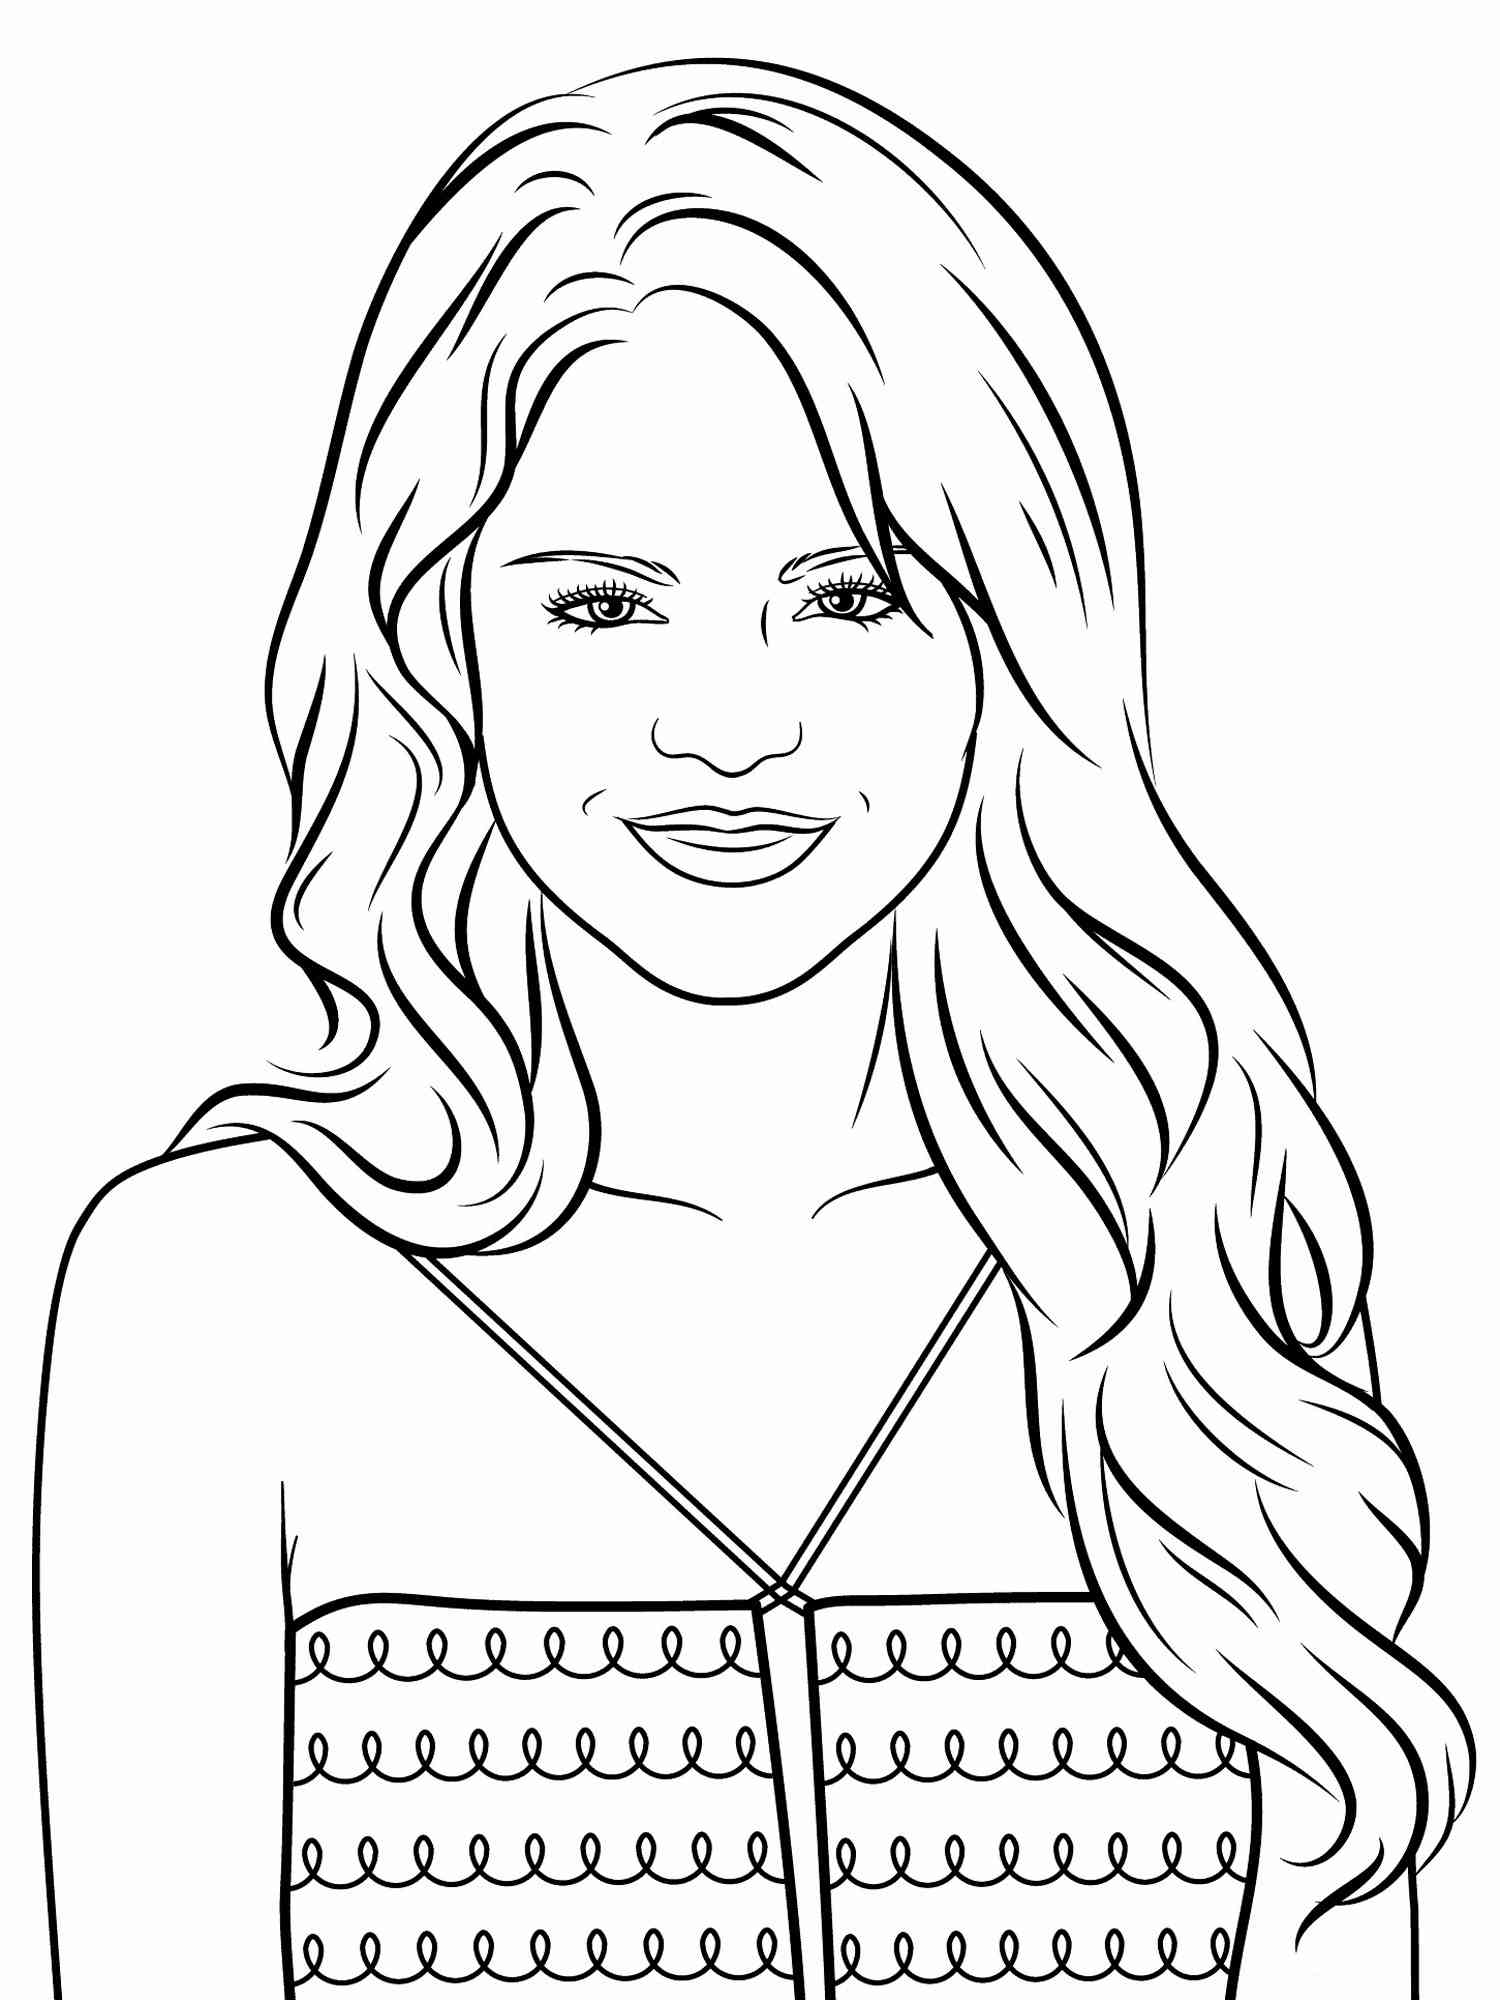 Selena Gomez coloring pages